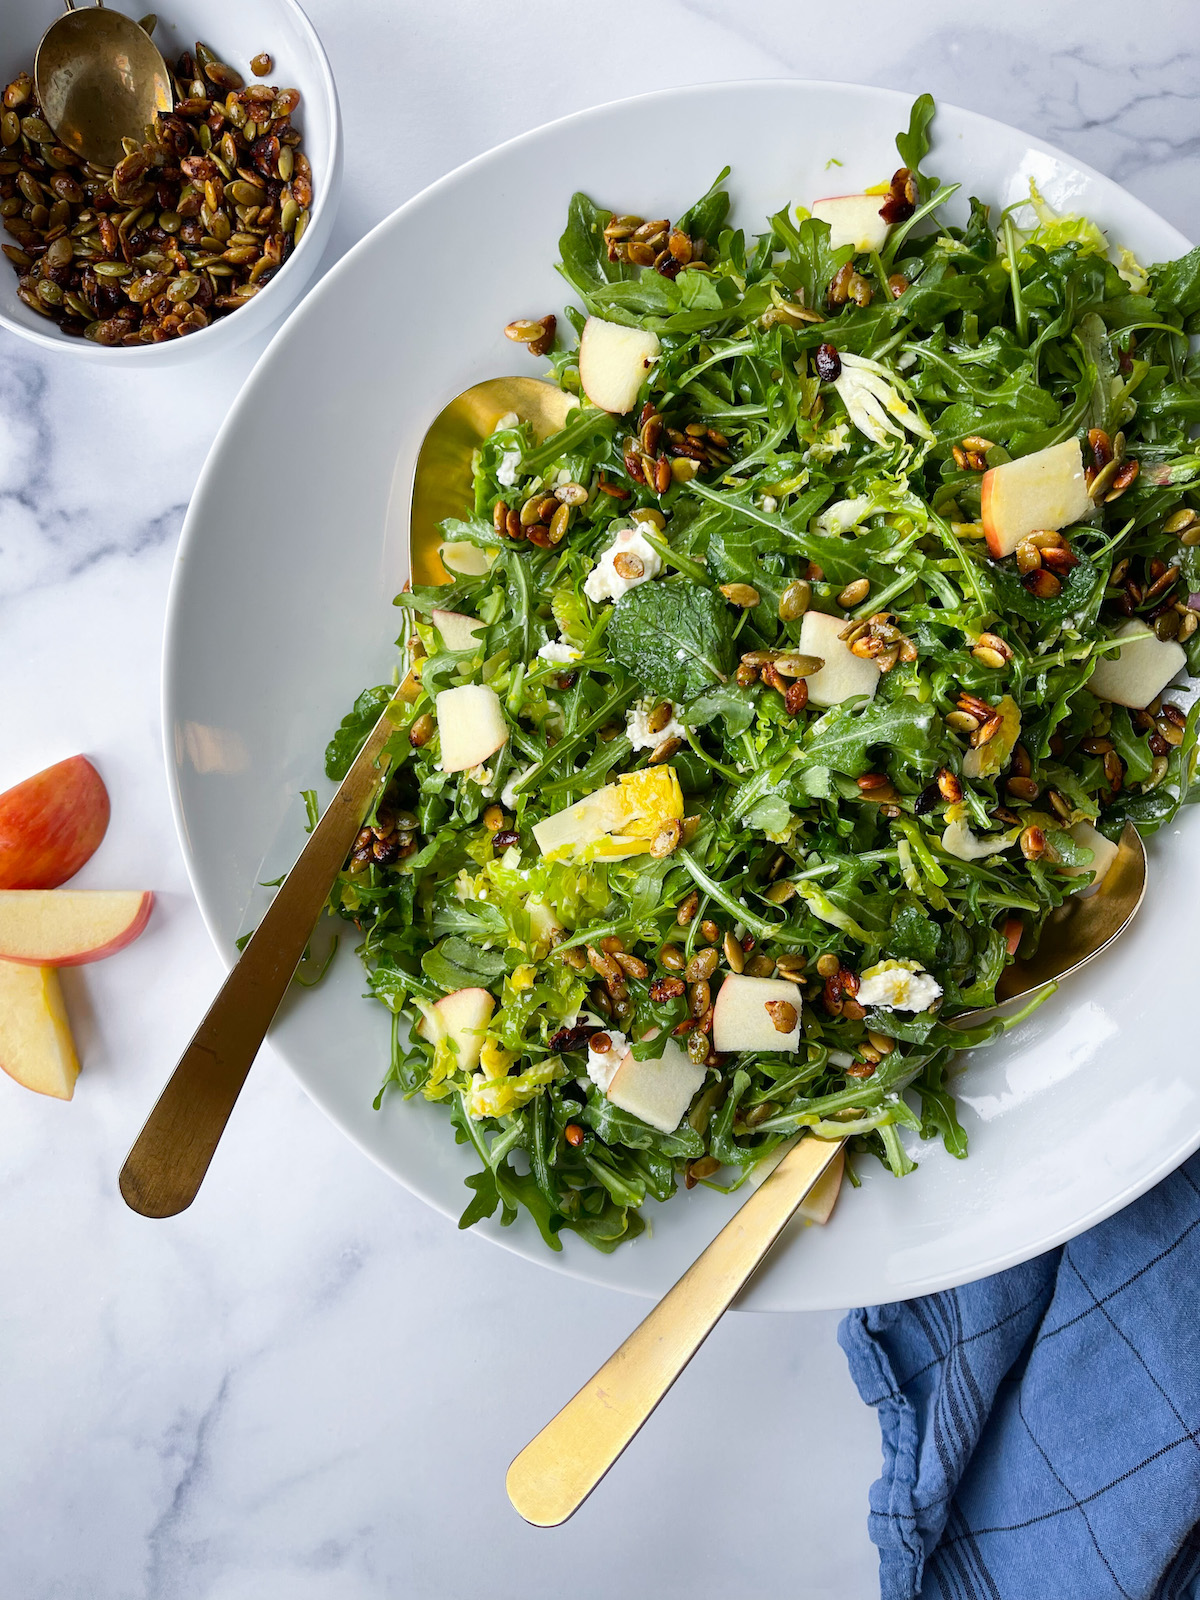 BRUSSELS SPROUT, ARUGULA AND APPLE SALAD WITH SPICED PEPITAS